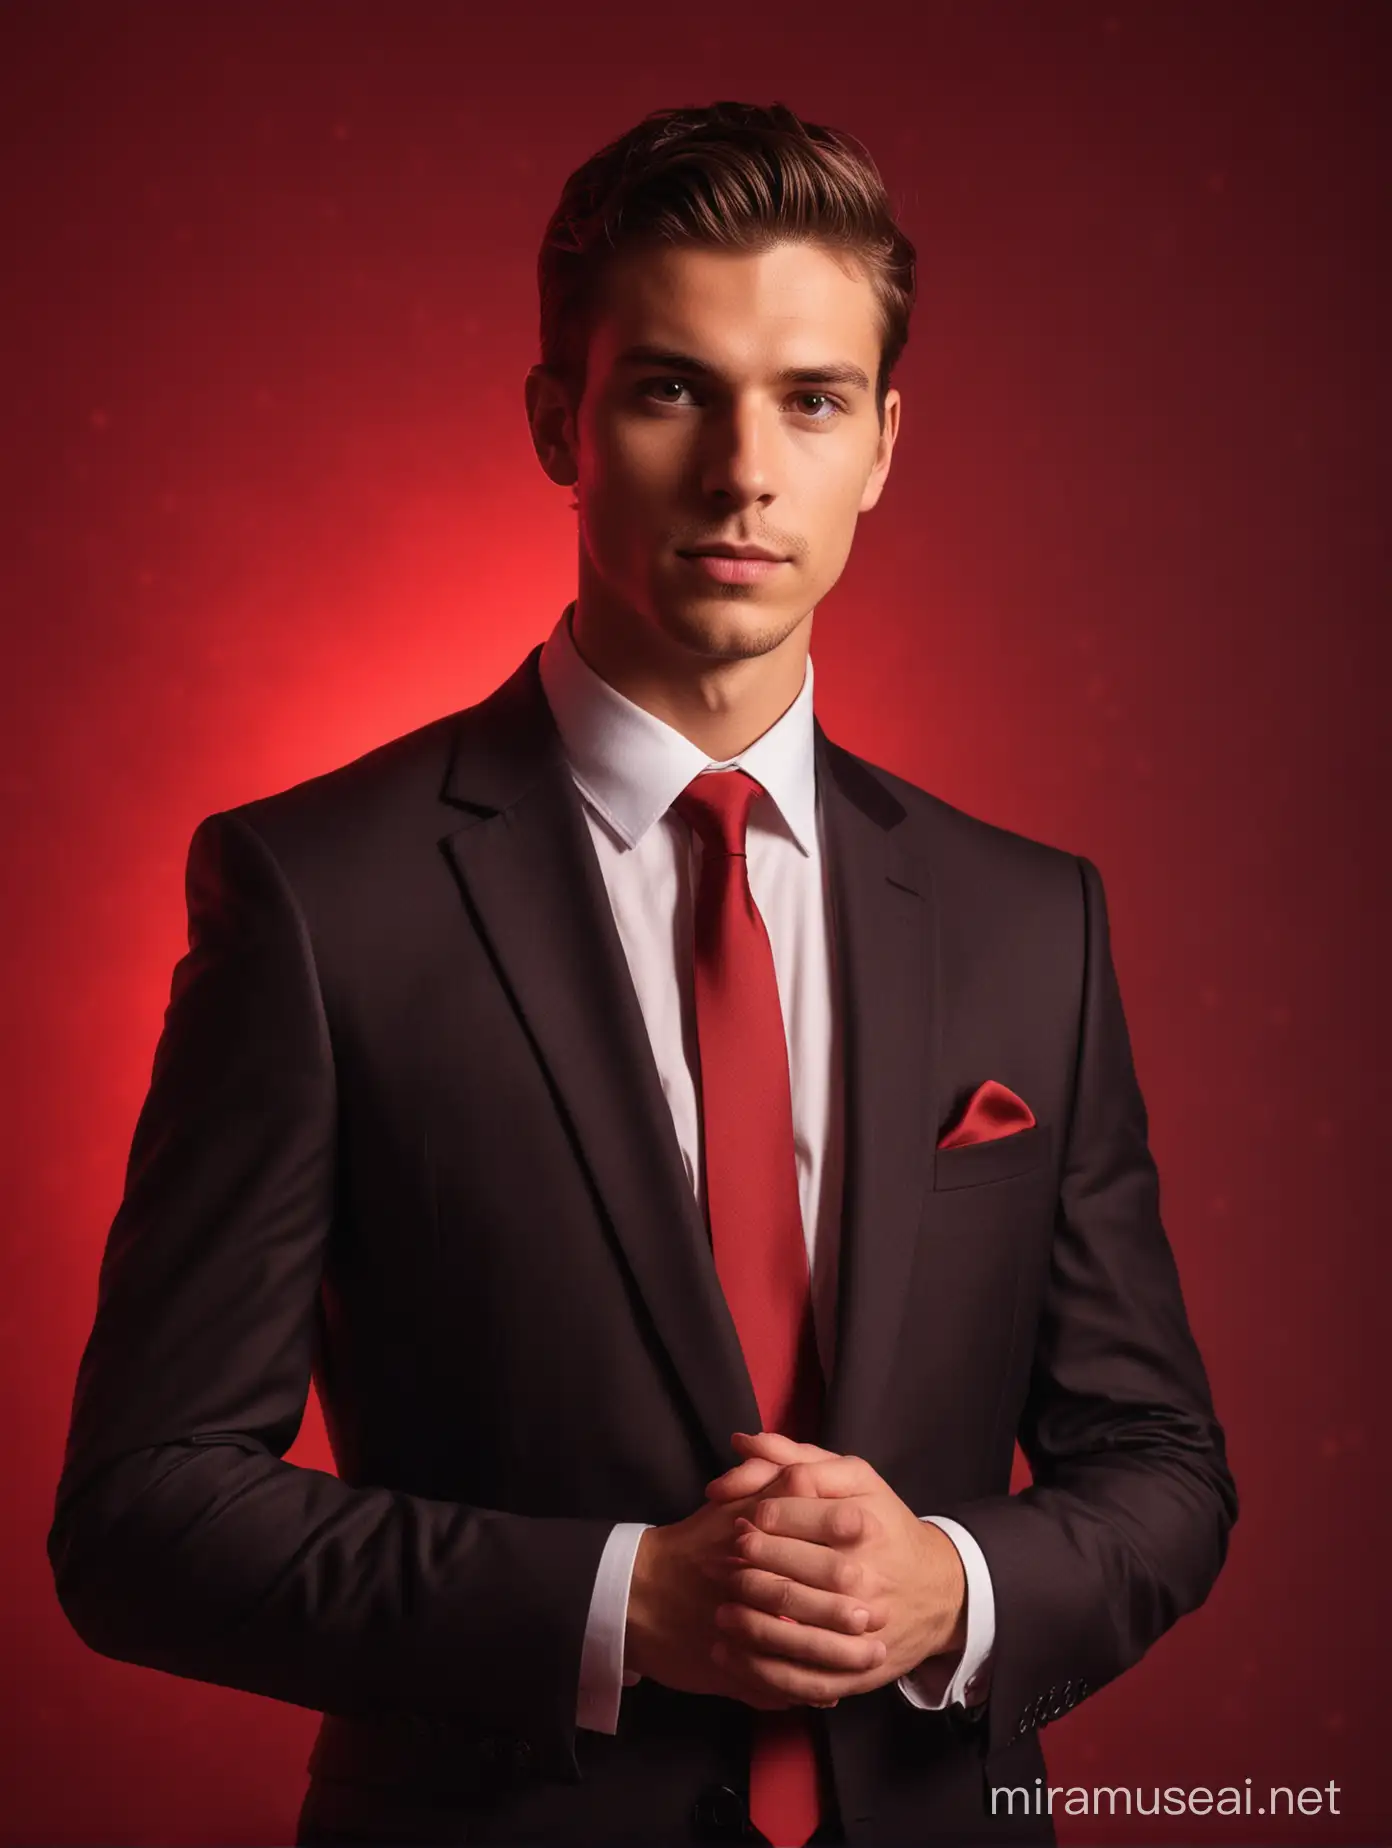 Stylish Young Man in Suit with Dramatic Red Backlight